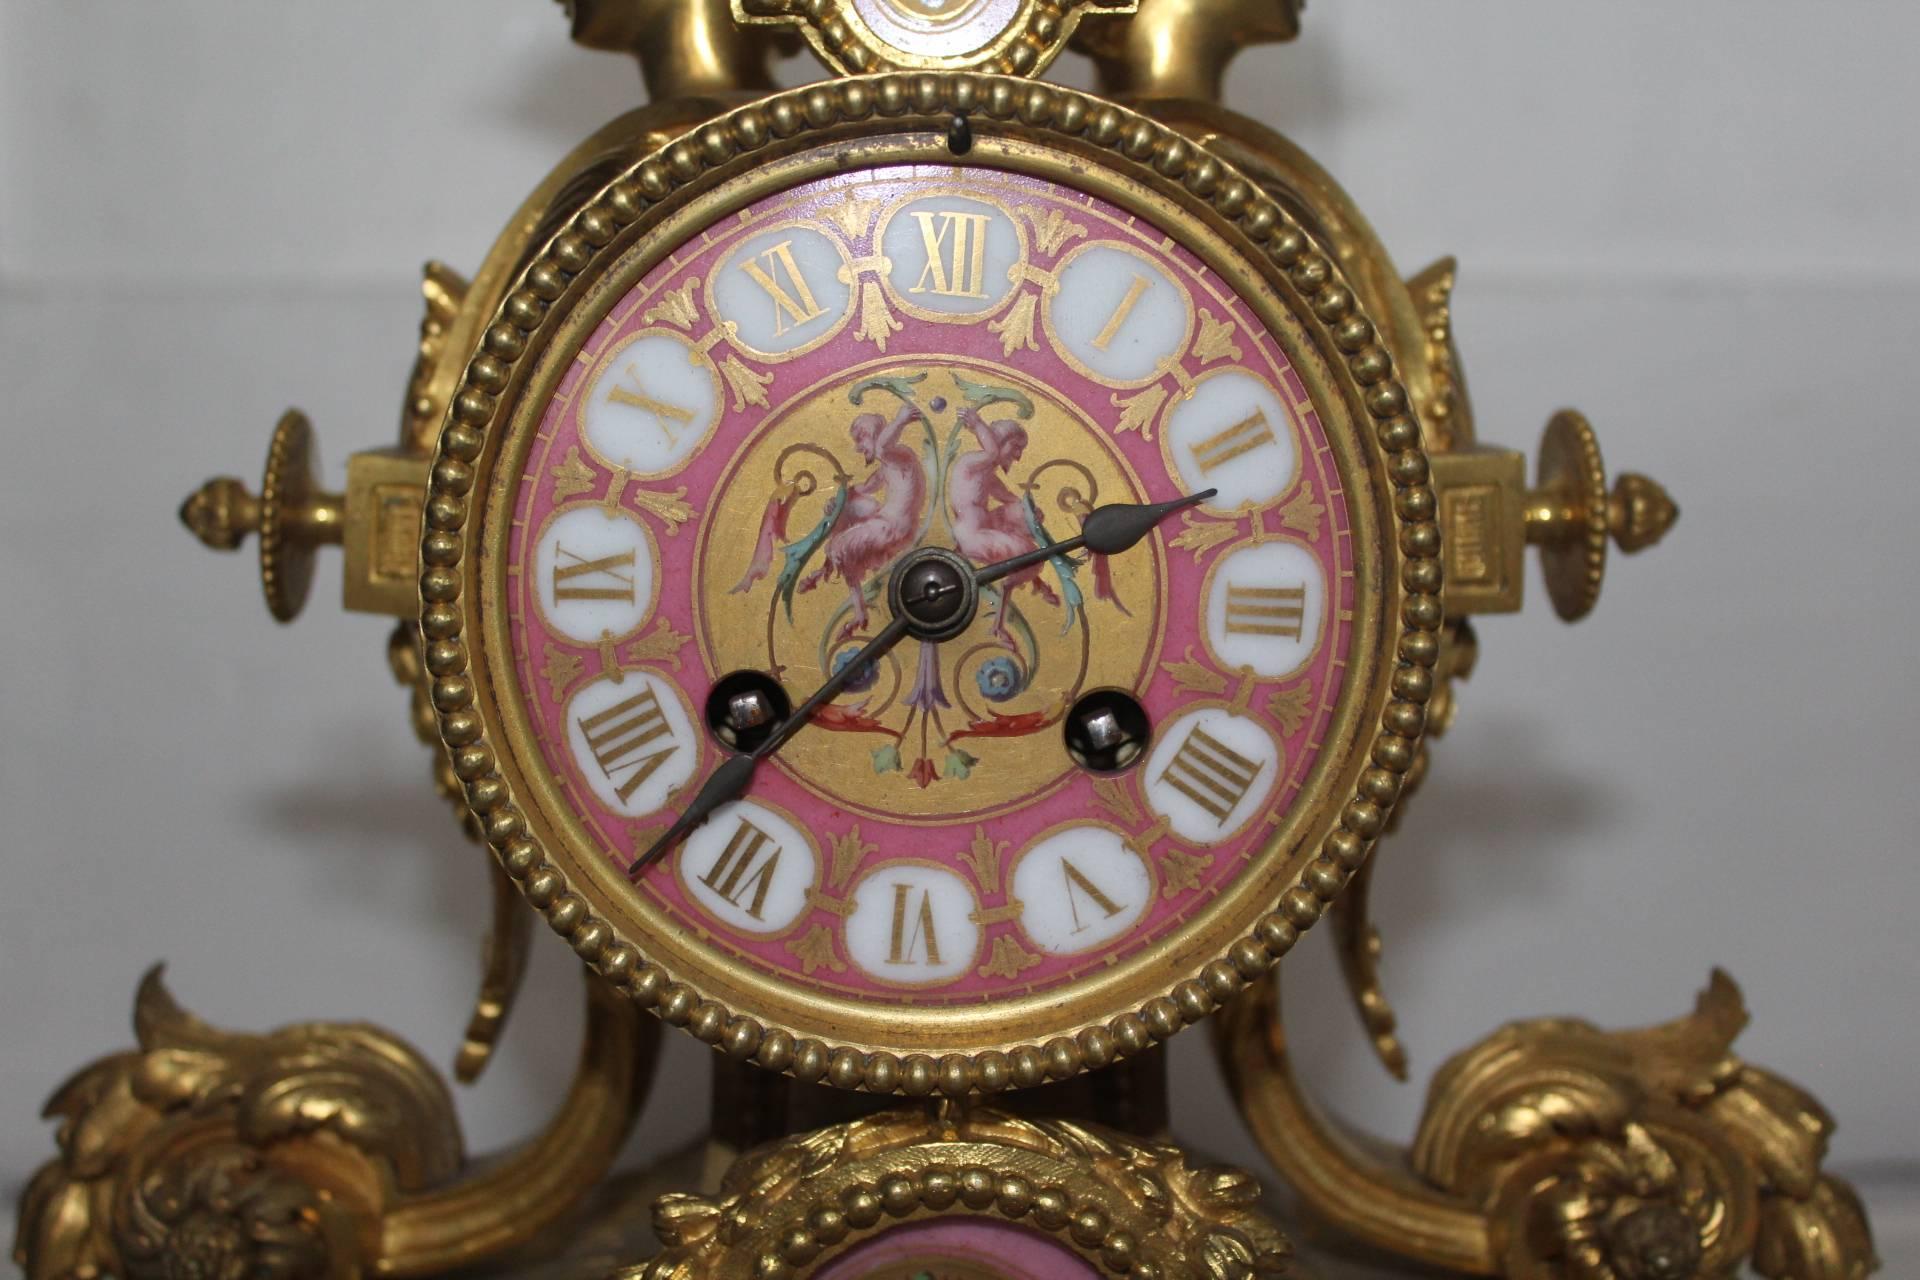 French, Ormolu and Pink Painted Panels Mantel Clock. Circa 1875.

Another wonderful French mantel clock with painted pink panels. The dial displaying roman numerals, spade hands and a painted centre with mythical creatures seated on beautiful